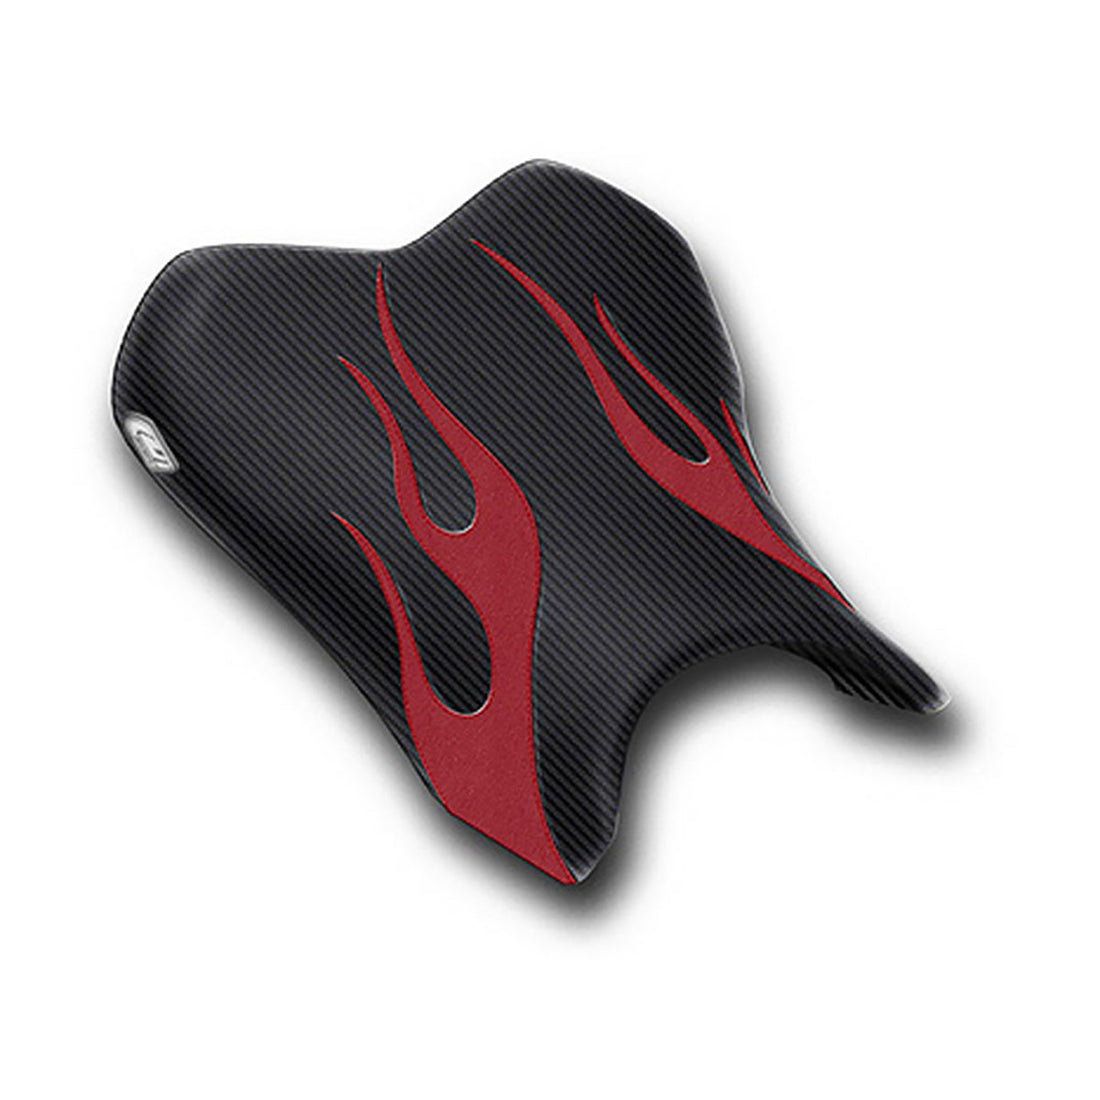 Yamaha | R6 06-07 | Flame | Rider Seat Cover